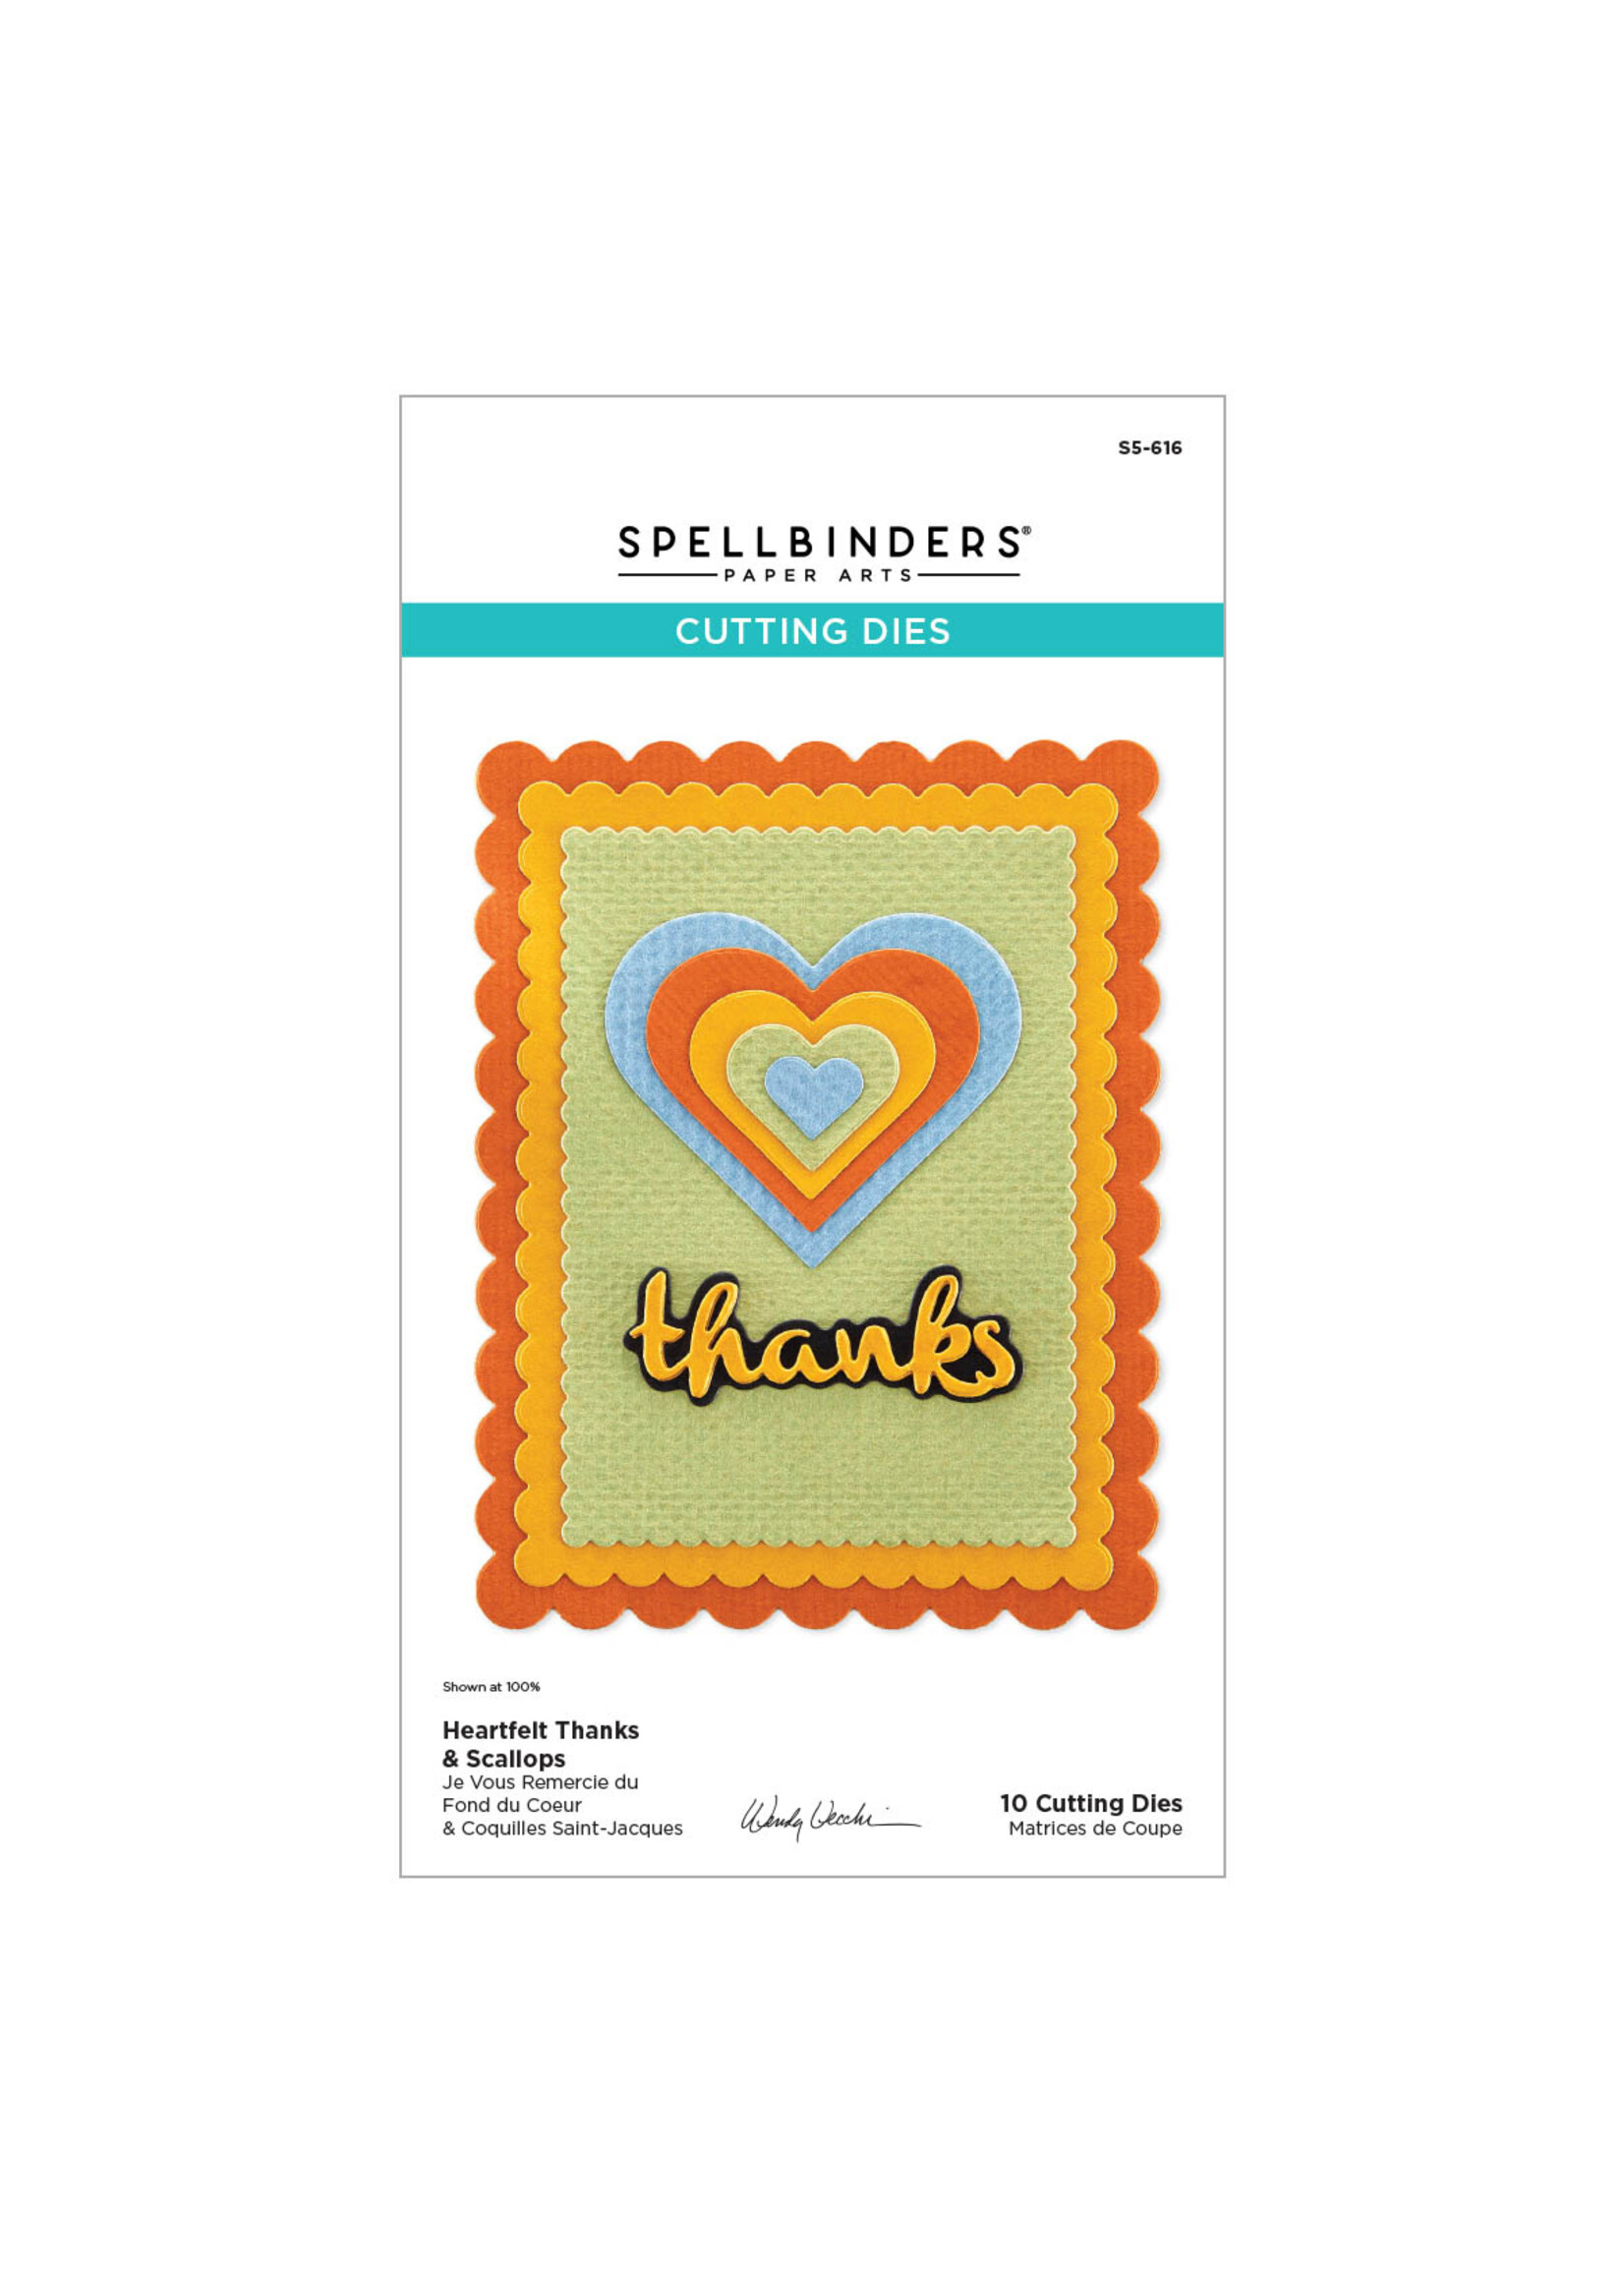 spellbinders Heartfelt Thanks & Scallops Etched Dies from the From the Garden Collection